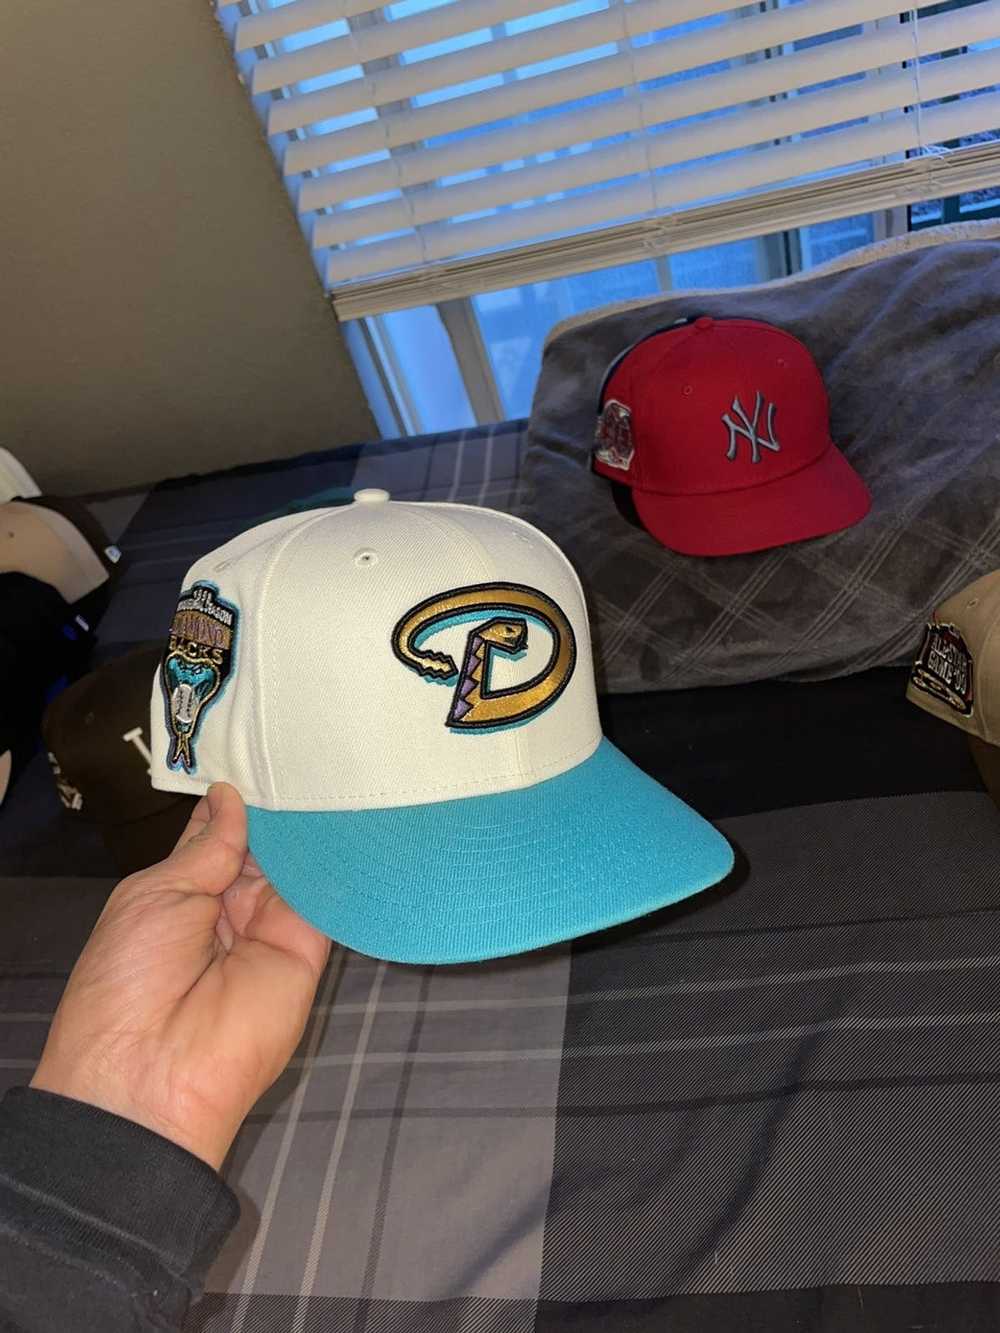 topperz Exclusive diamondbacks serpientes, Size 7, New Era 59fifty Fitted  Hat